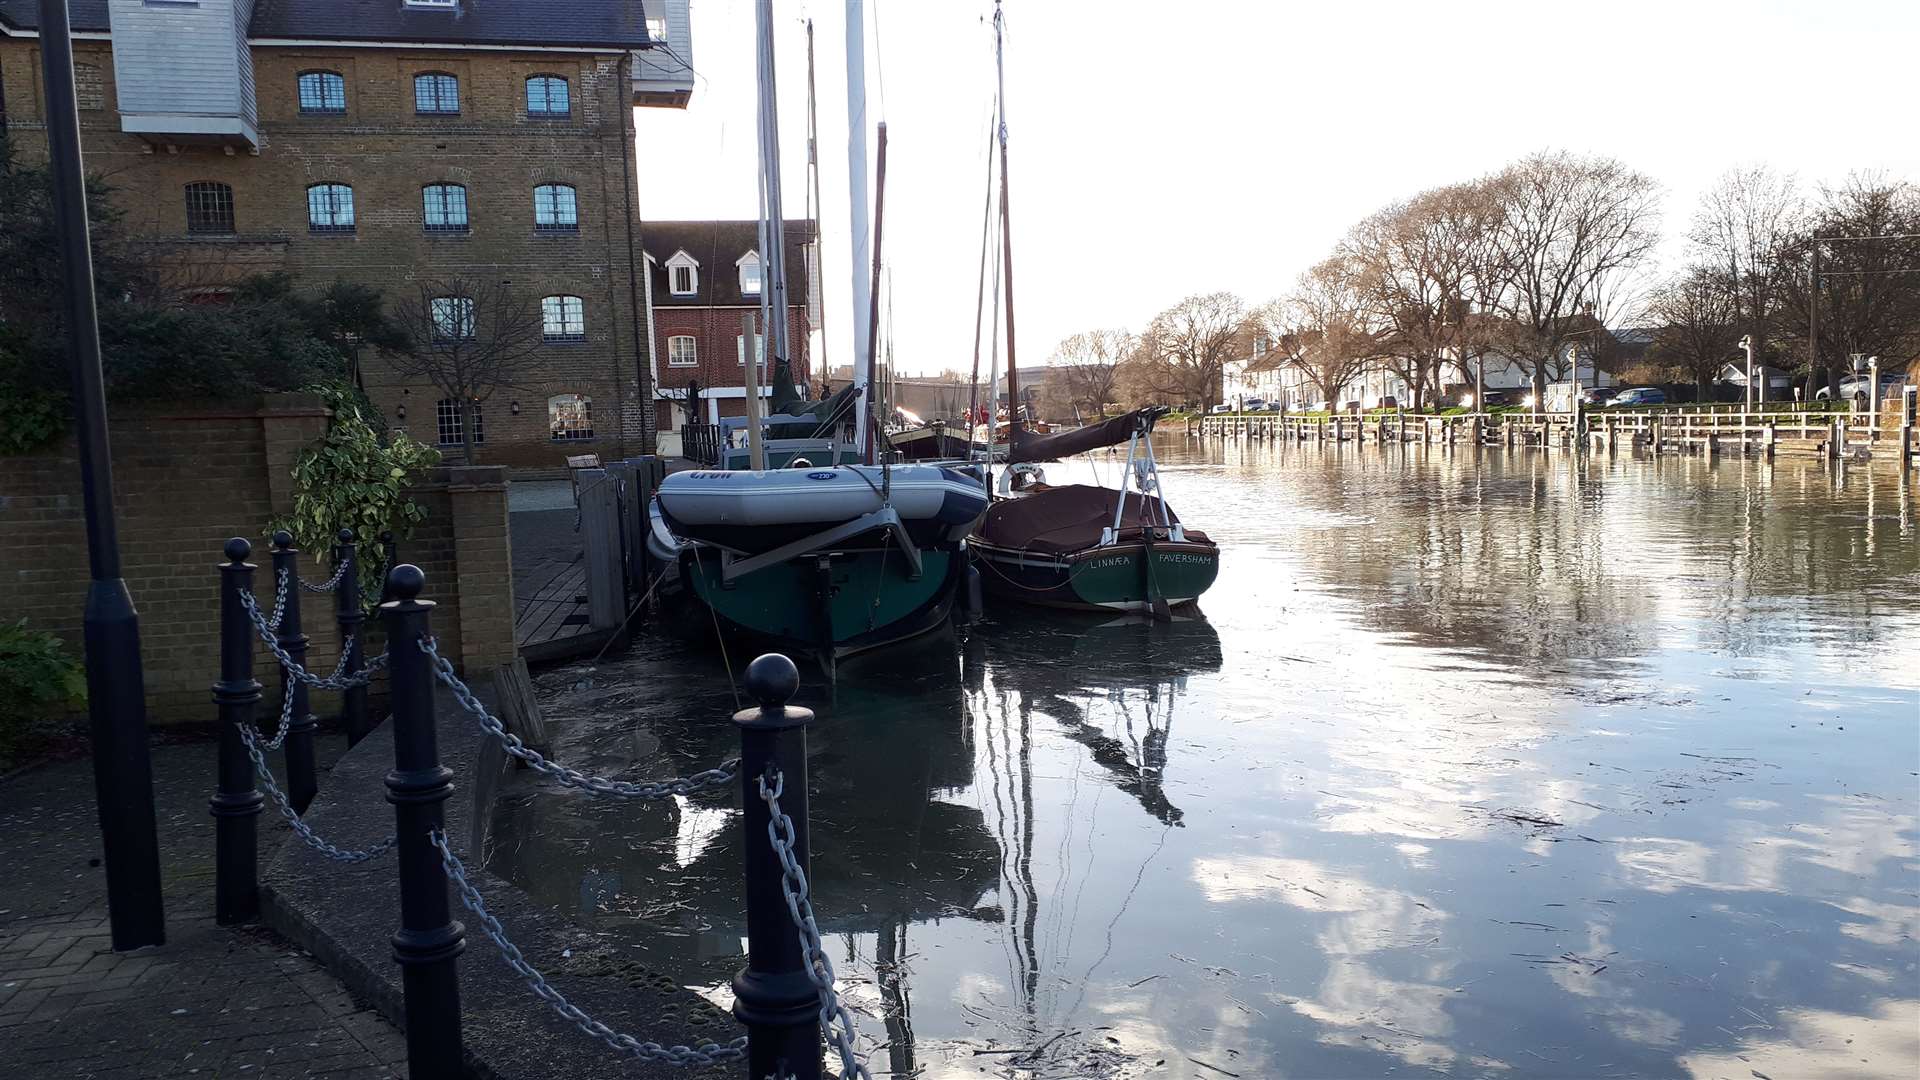 Swale was third on the list. In January, high tides caused minor flooding in the Faversham by the creek